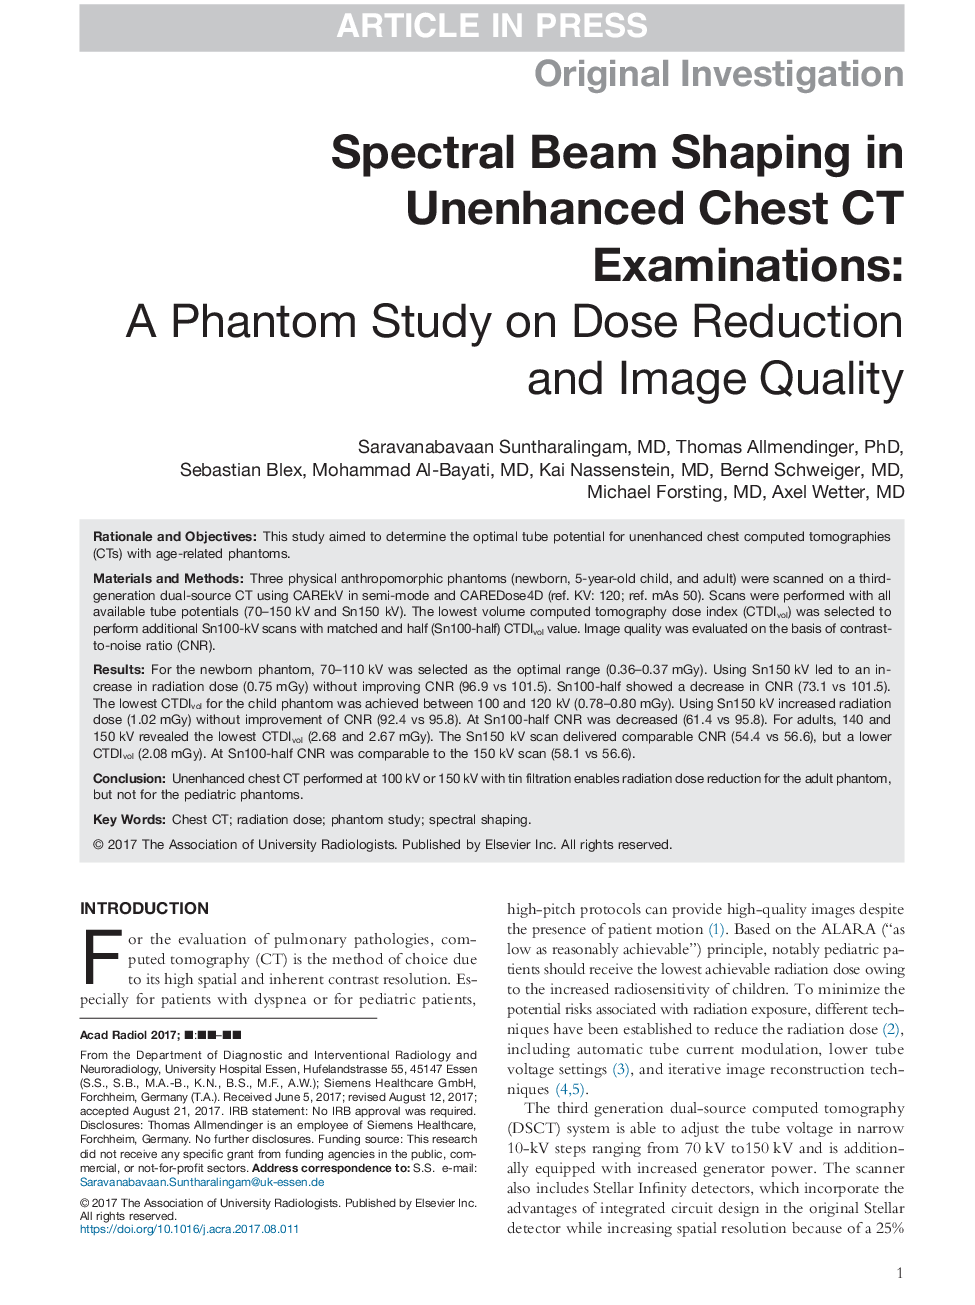 Spectral Beam Shaping in Unenhanced Chest CT Examinations